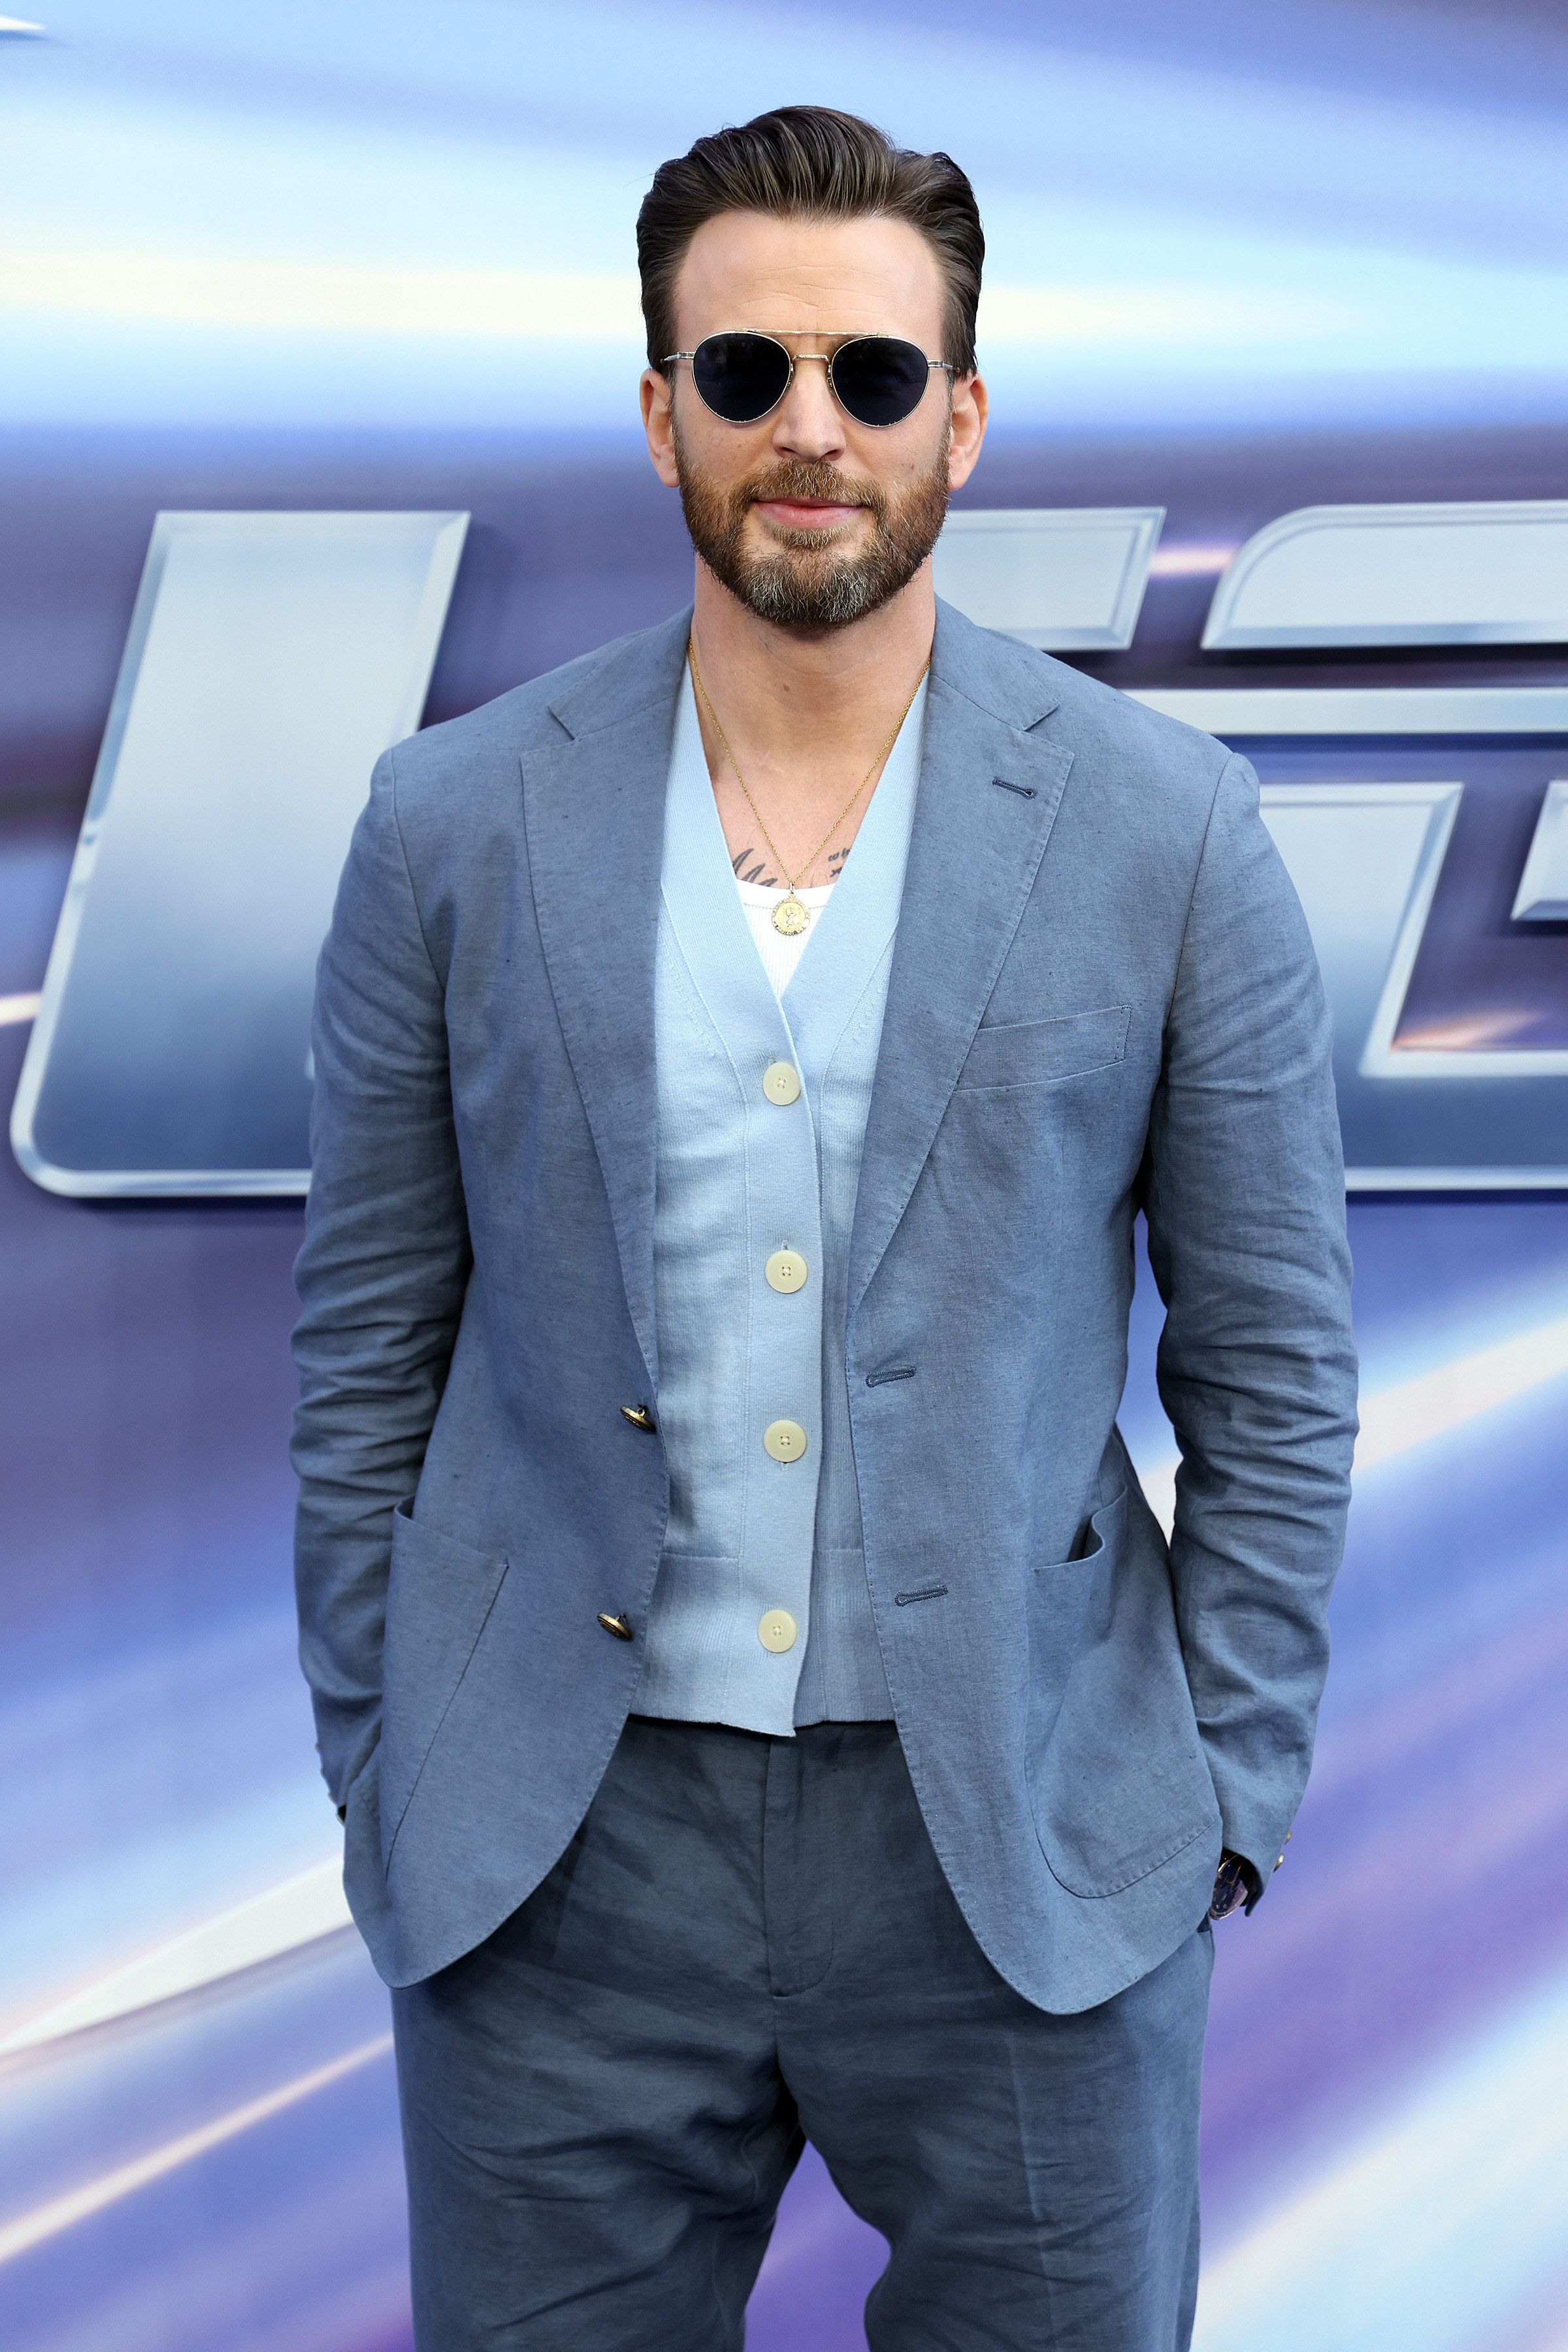 Chris Evans wearing sunglasses with his hands in his pockets